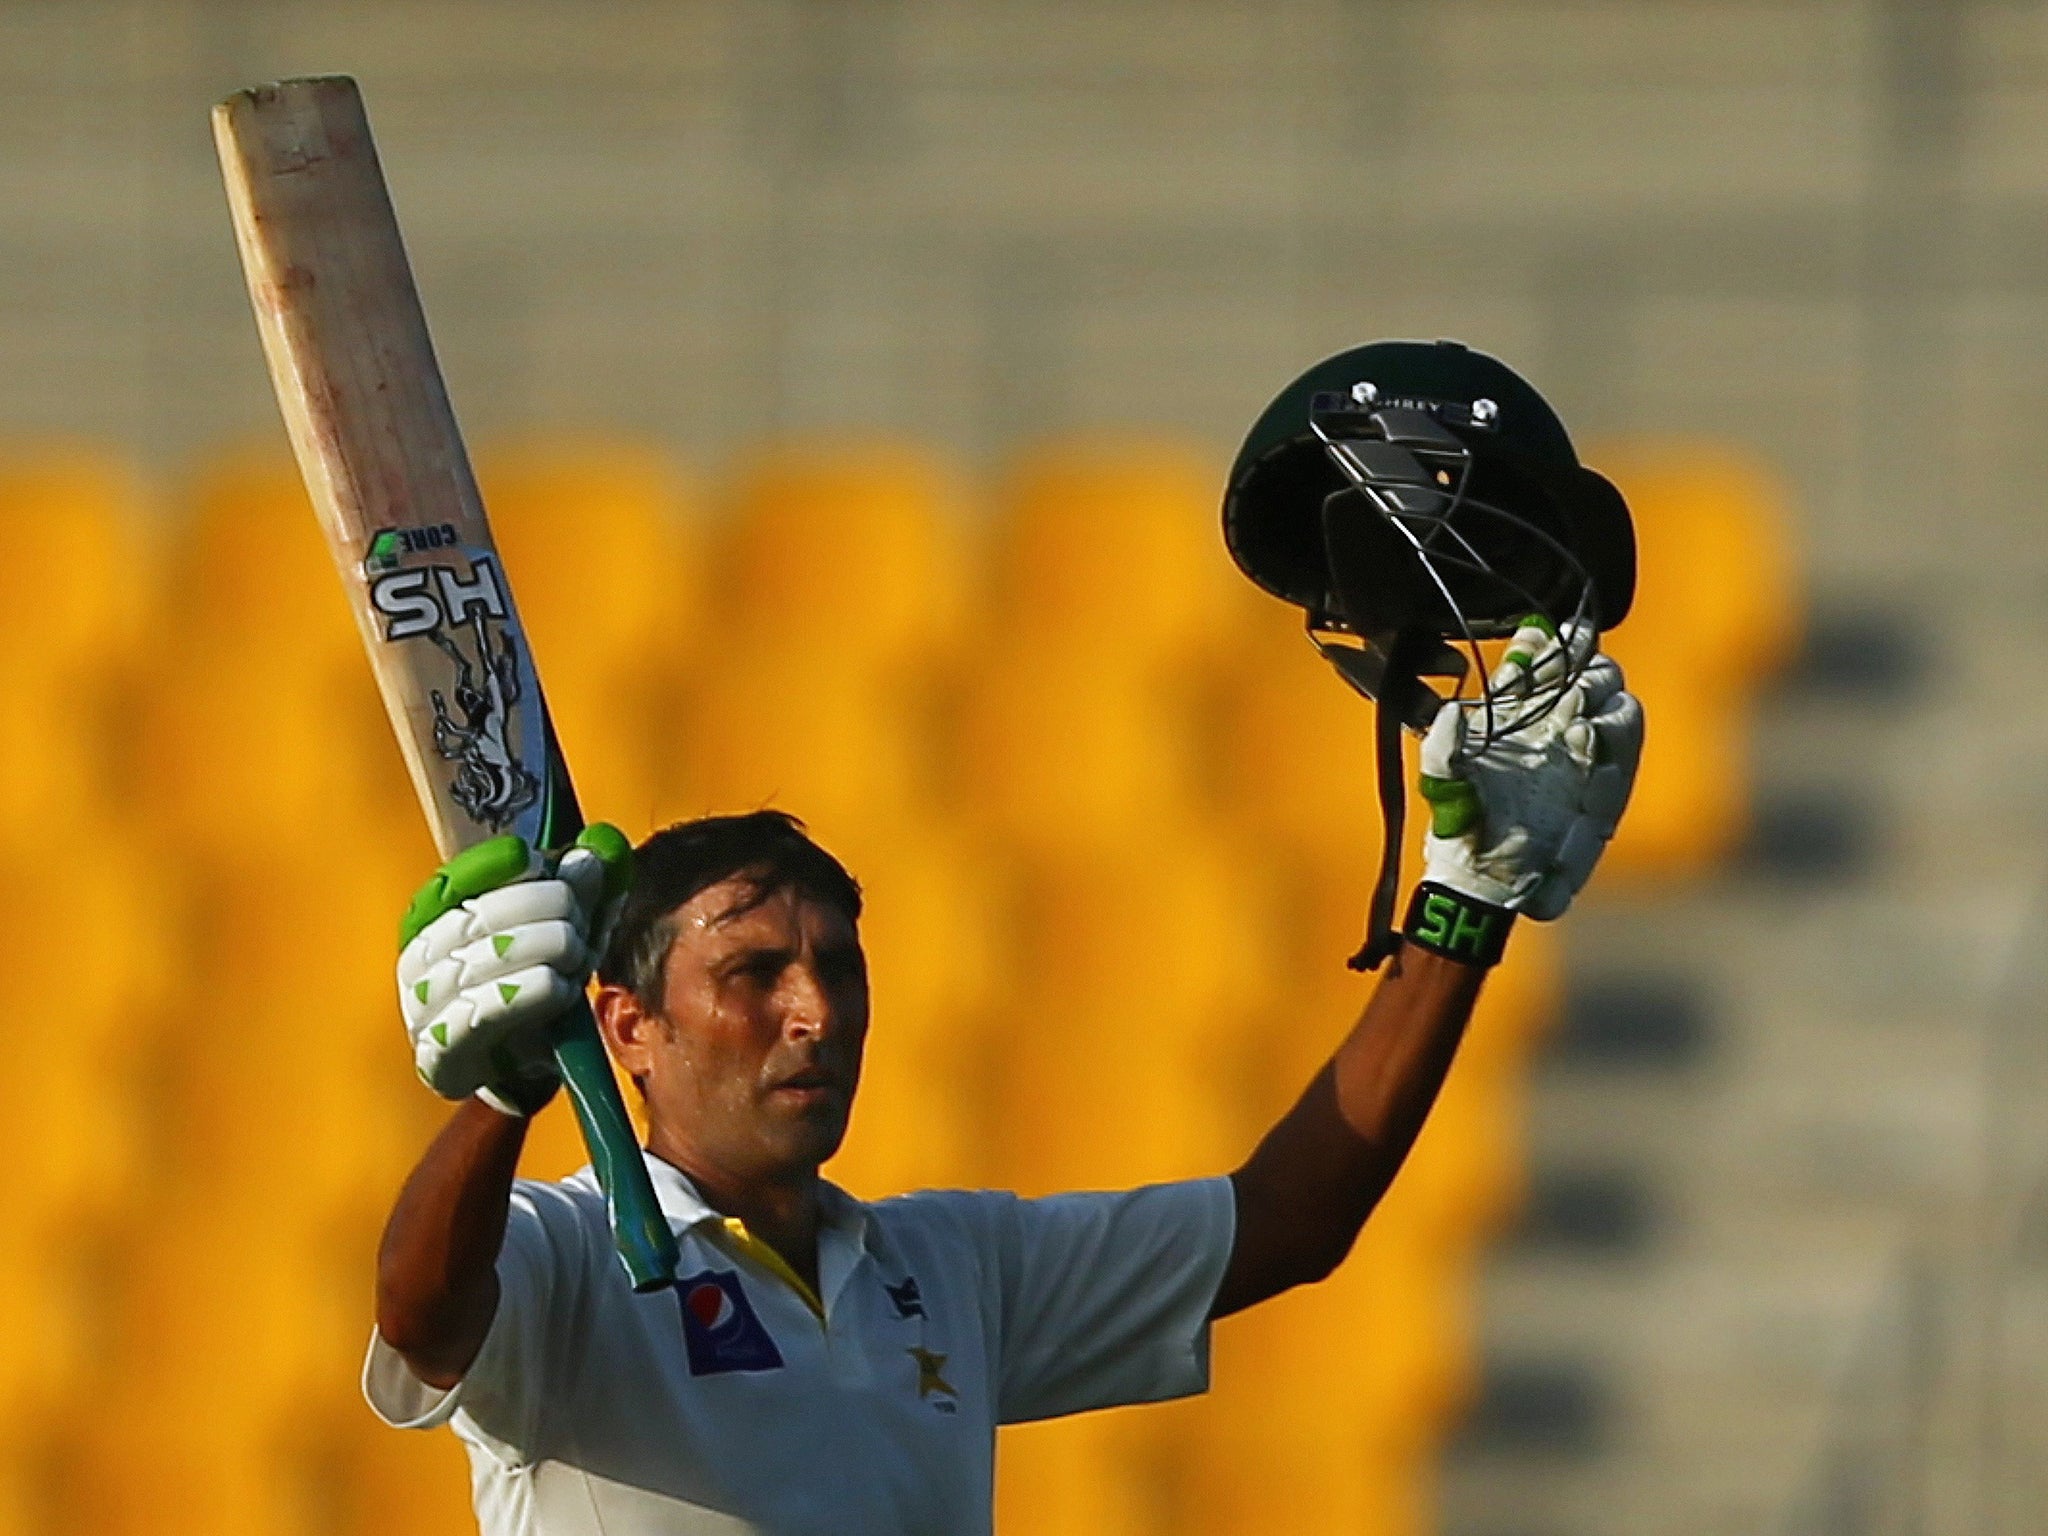 Younis Khan scored 468 runs, including three centuries, in the series